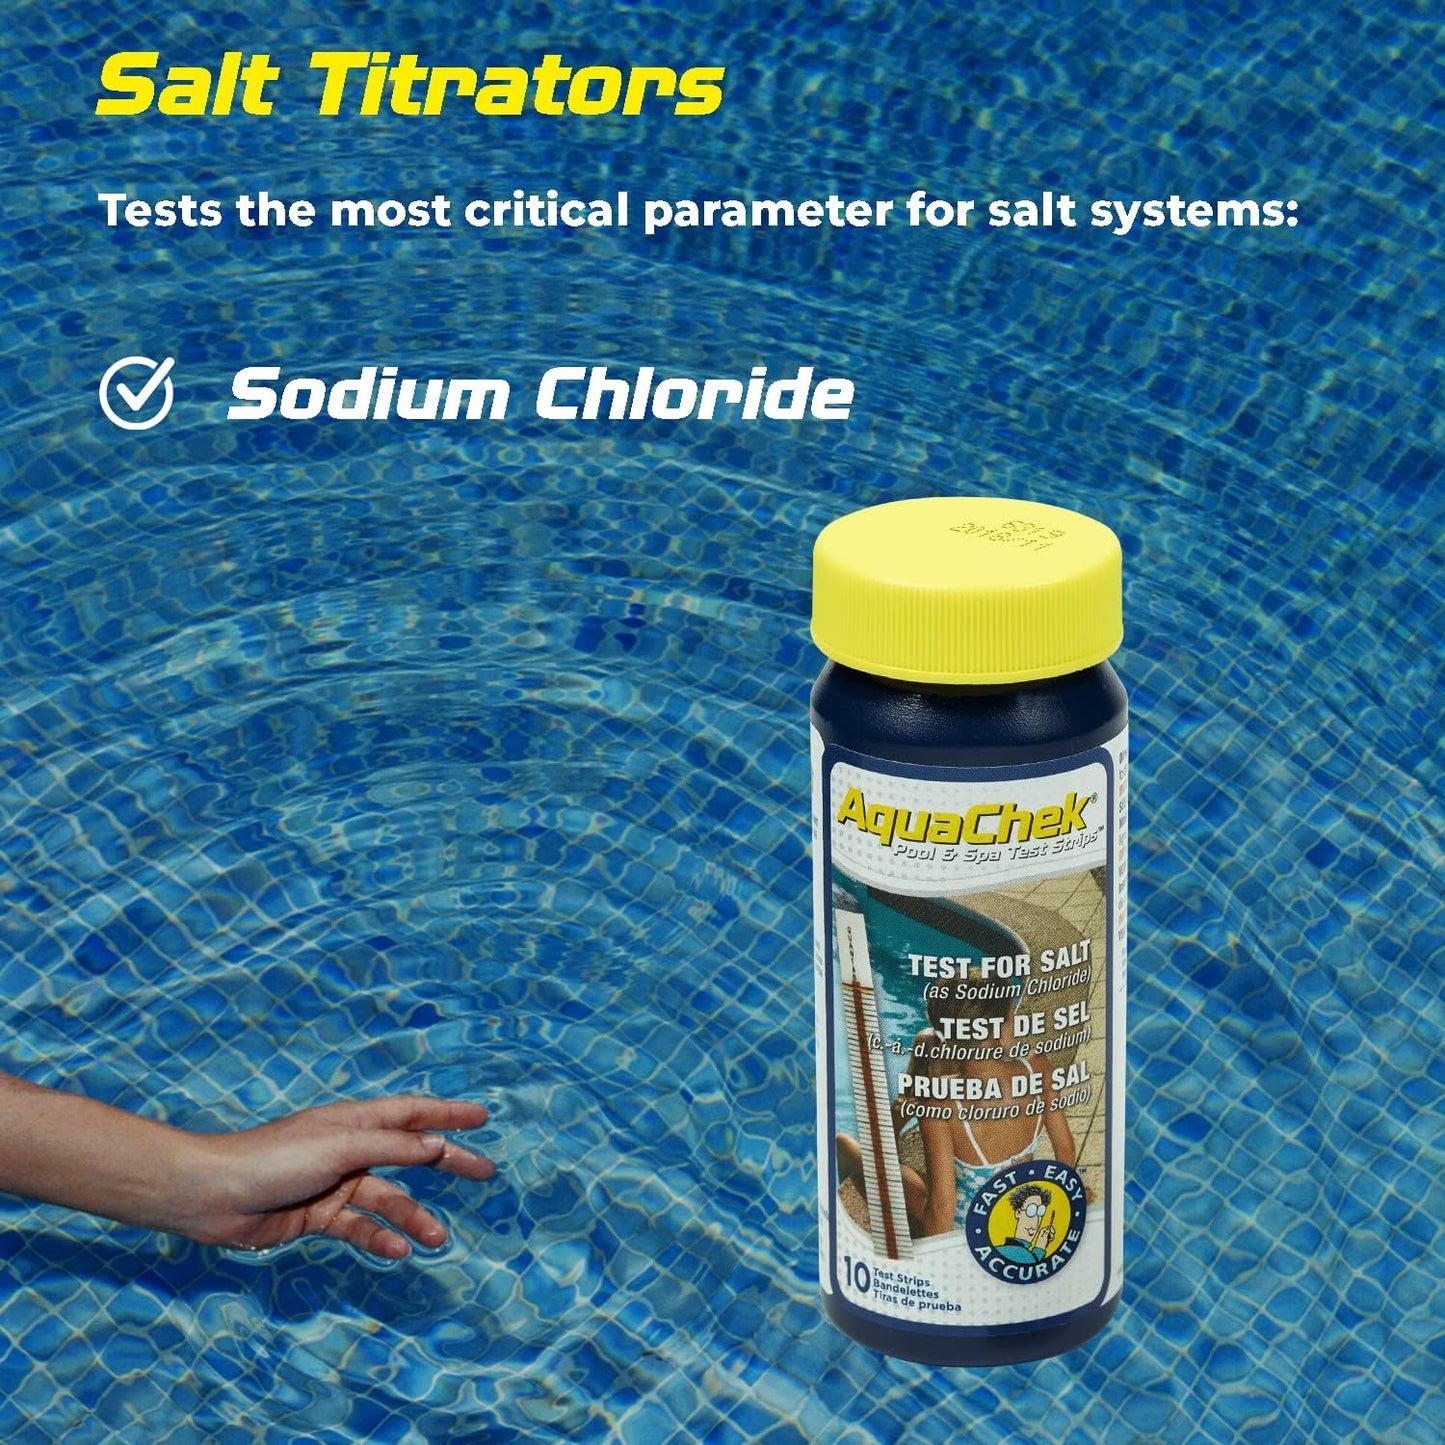 AquaChek Salt Test Strip Titrators for Pools - Salt Water Pool Test Strips for Sodium Chloride - Quick and Accurate Results - Professional Water Quality Testing Kit (10 Strips)